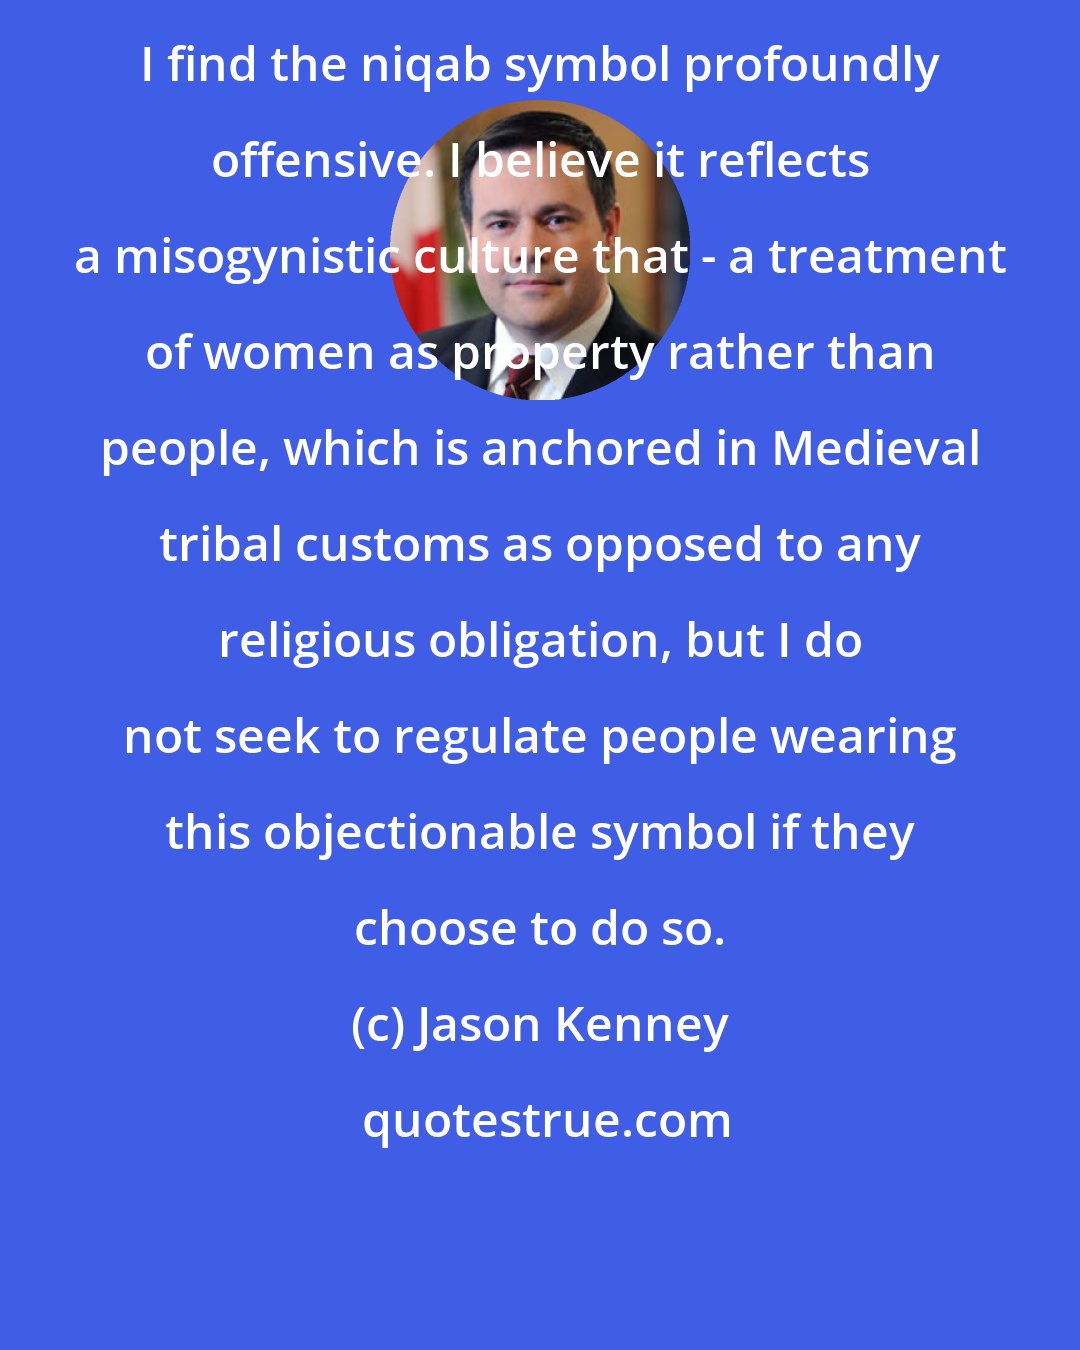 Jason Kenney: I find the niqab symbol profoundly offensive. I believe it reflects a misogynistic culture that - a treatment of women as property rather than people, which is anchored in Medieval tribal customs as opposed to any religious obligation, but I do not seek to regulate people wearing this objectionable symbol if they choose to do so.